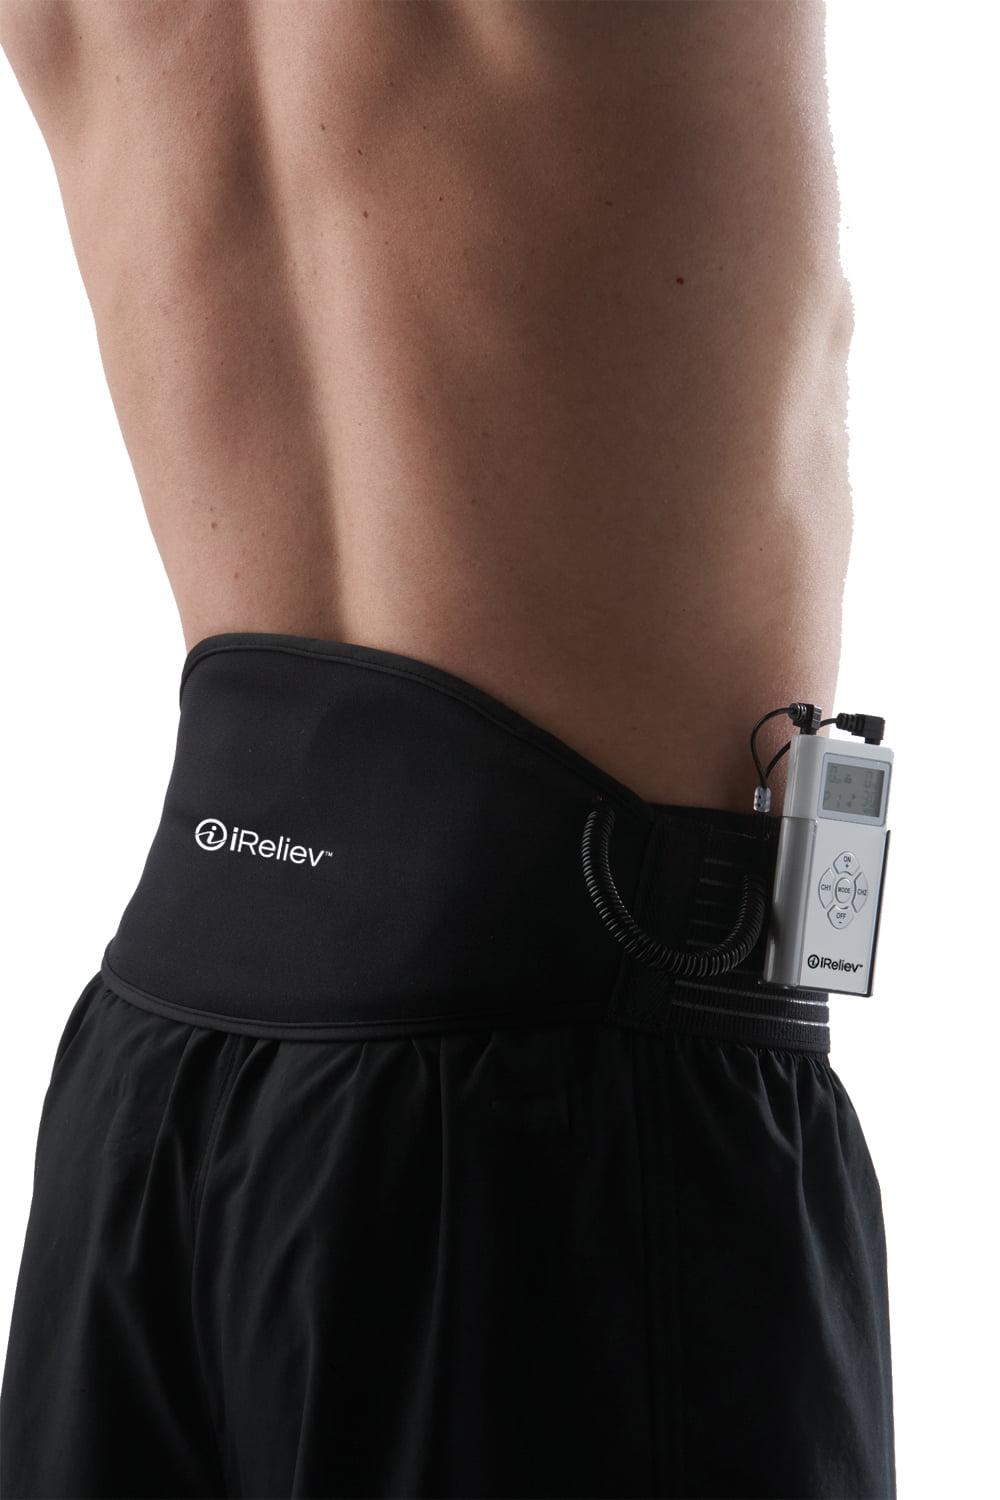 iReliev TENS Back Pain Relief System: #1 Fast Free Shipping